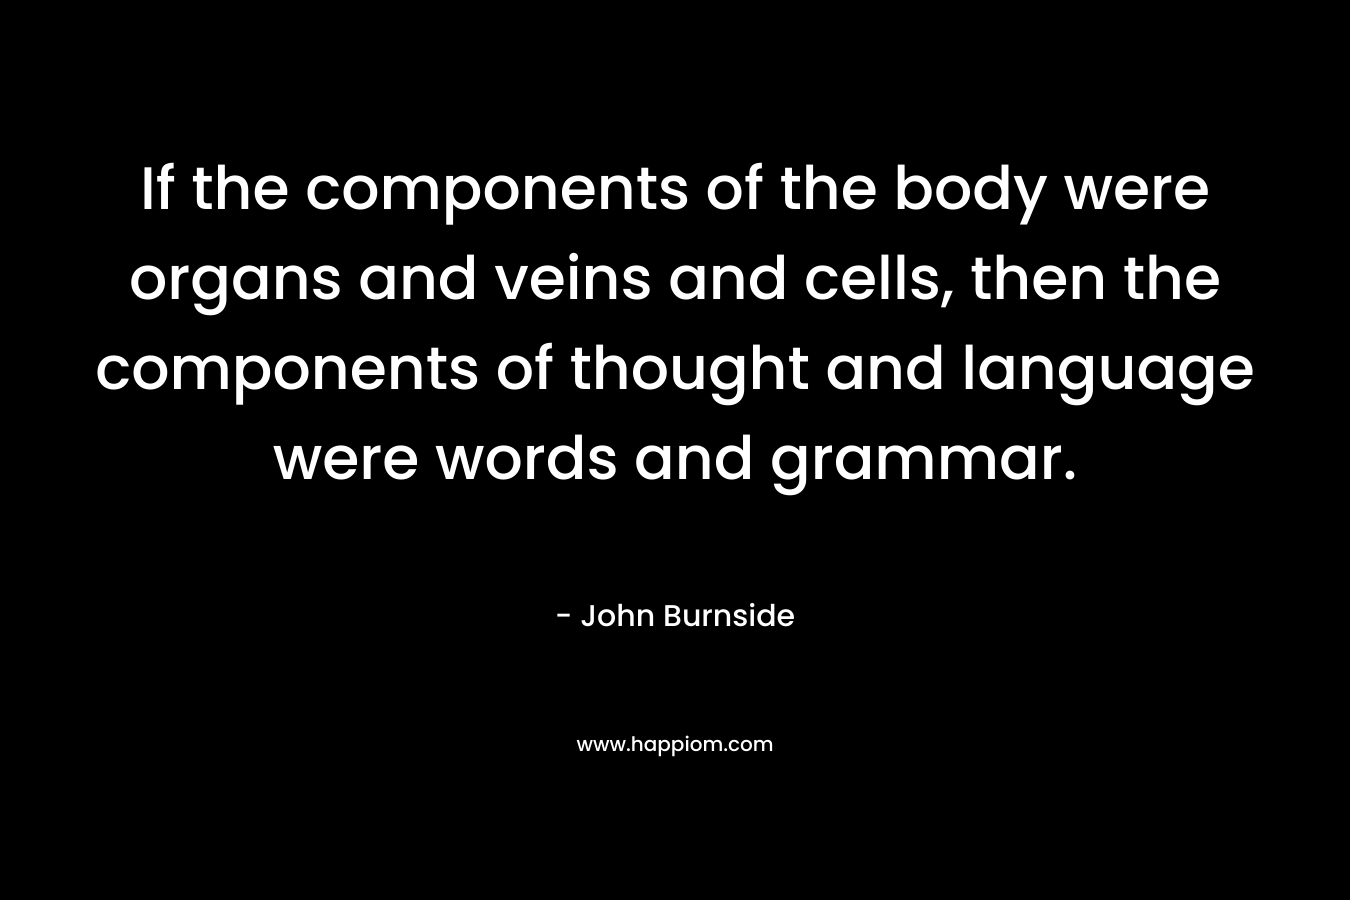 If the components of the body were organs and veins and cells, then the components of thought and language were words and grammar. – John Burnside